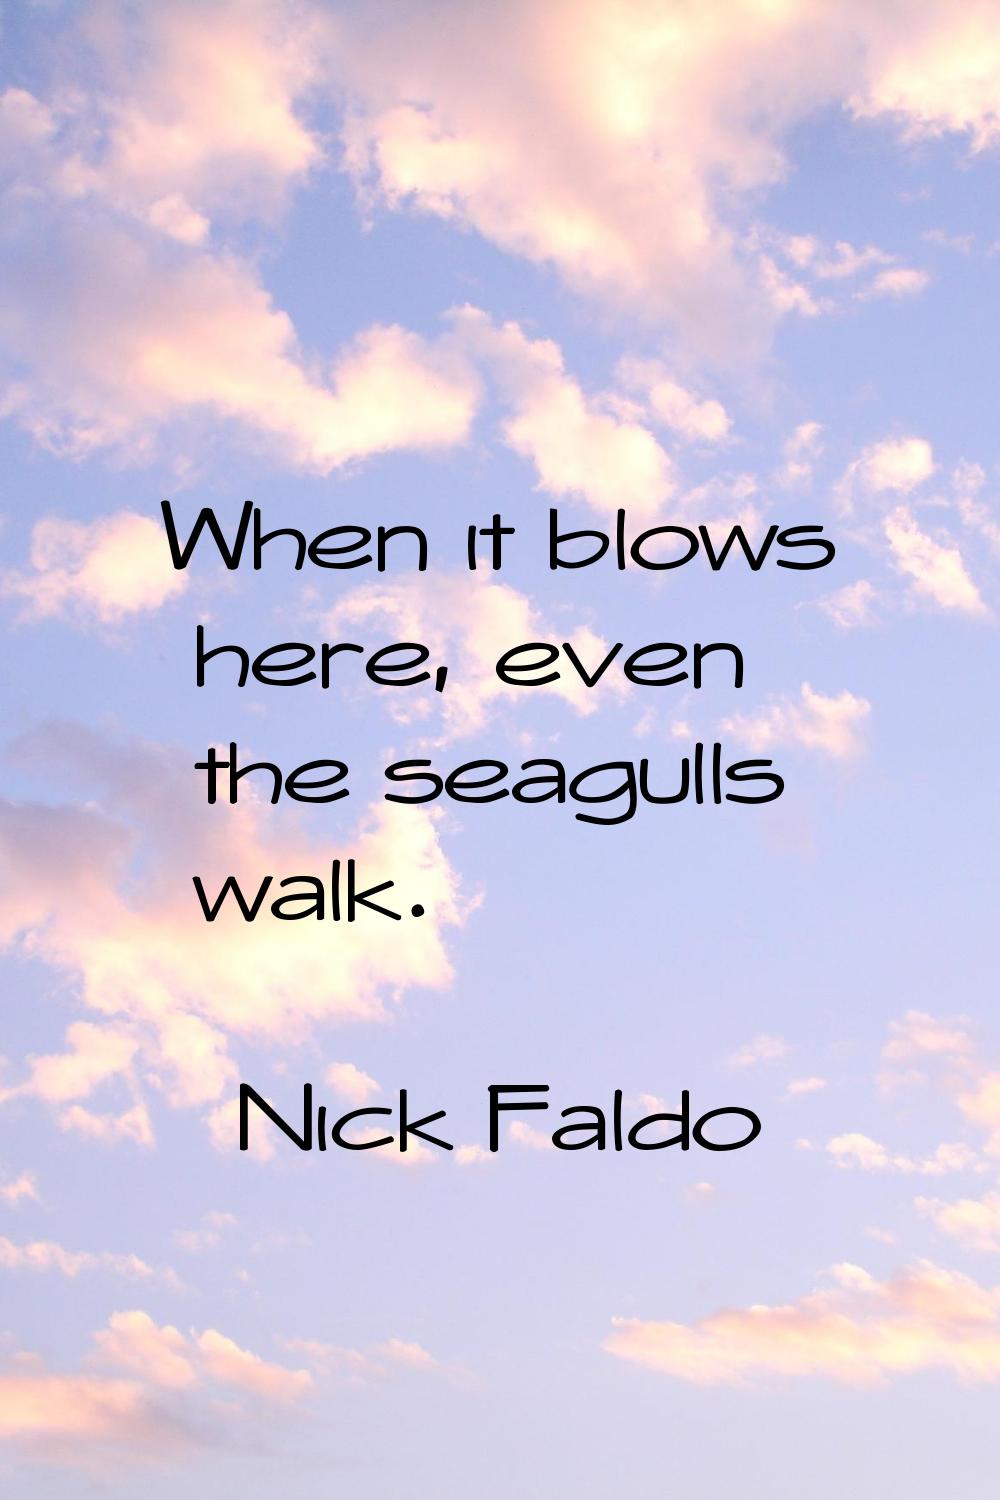 When it blows here, even the seagulls walk.